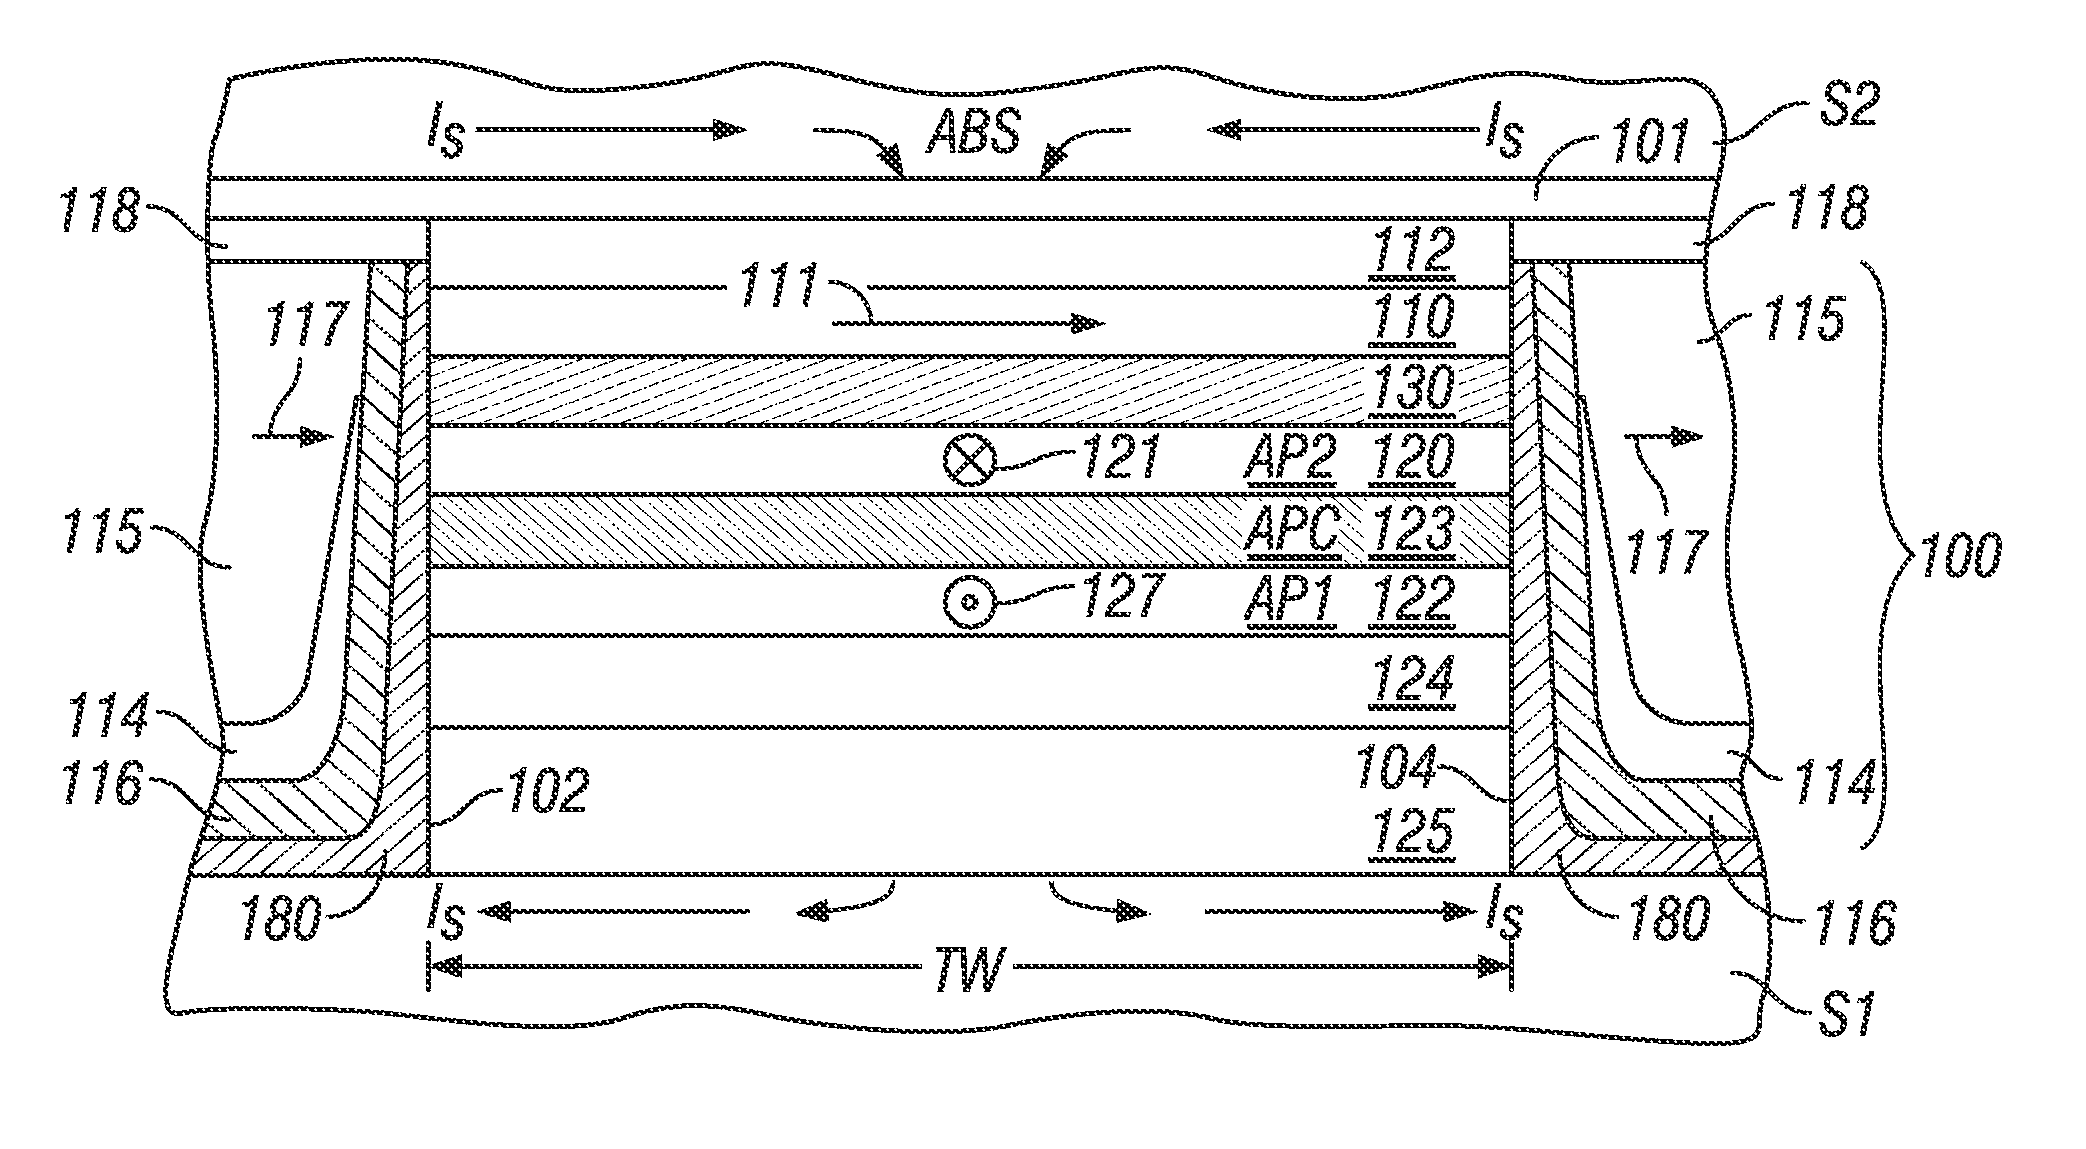 Current-perpendicular-to-the-plane (CPP) magnetoresistive (MR) sensor with magnetic damping material at the sensor edges